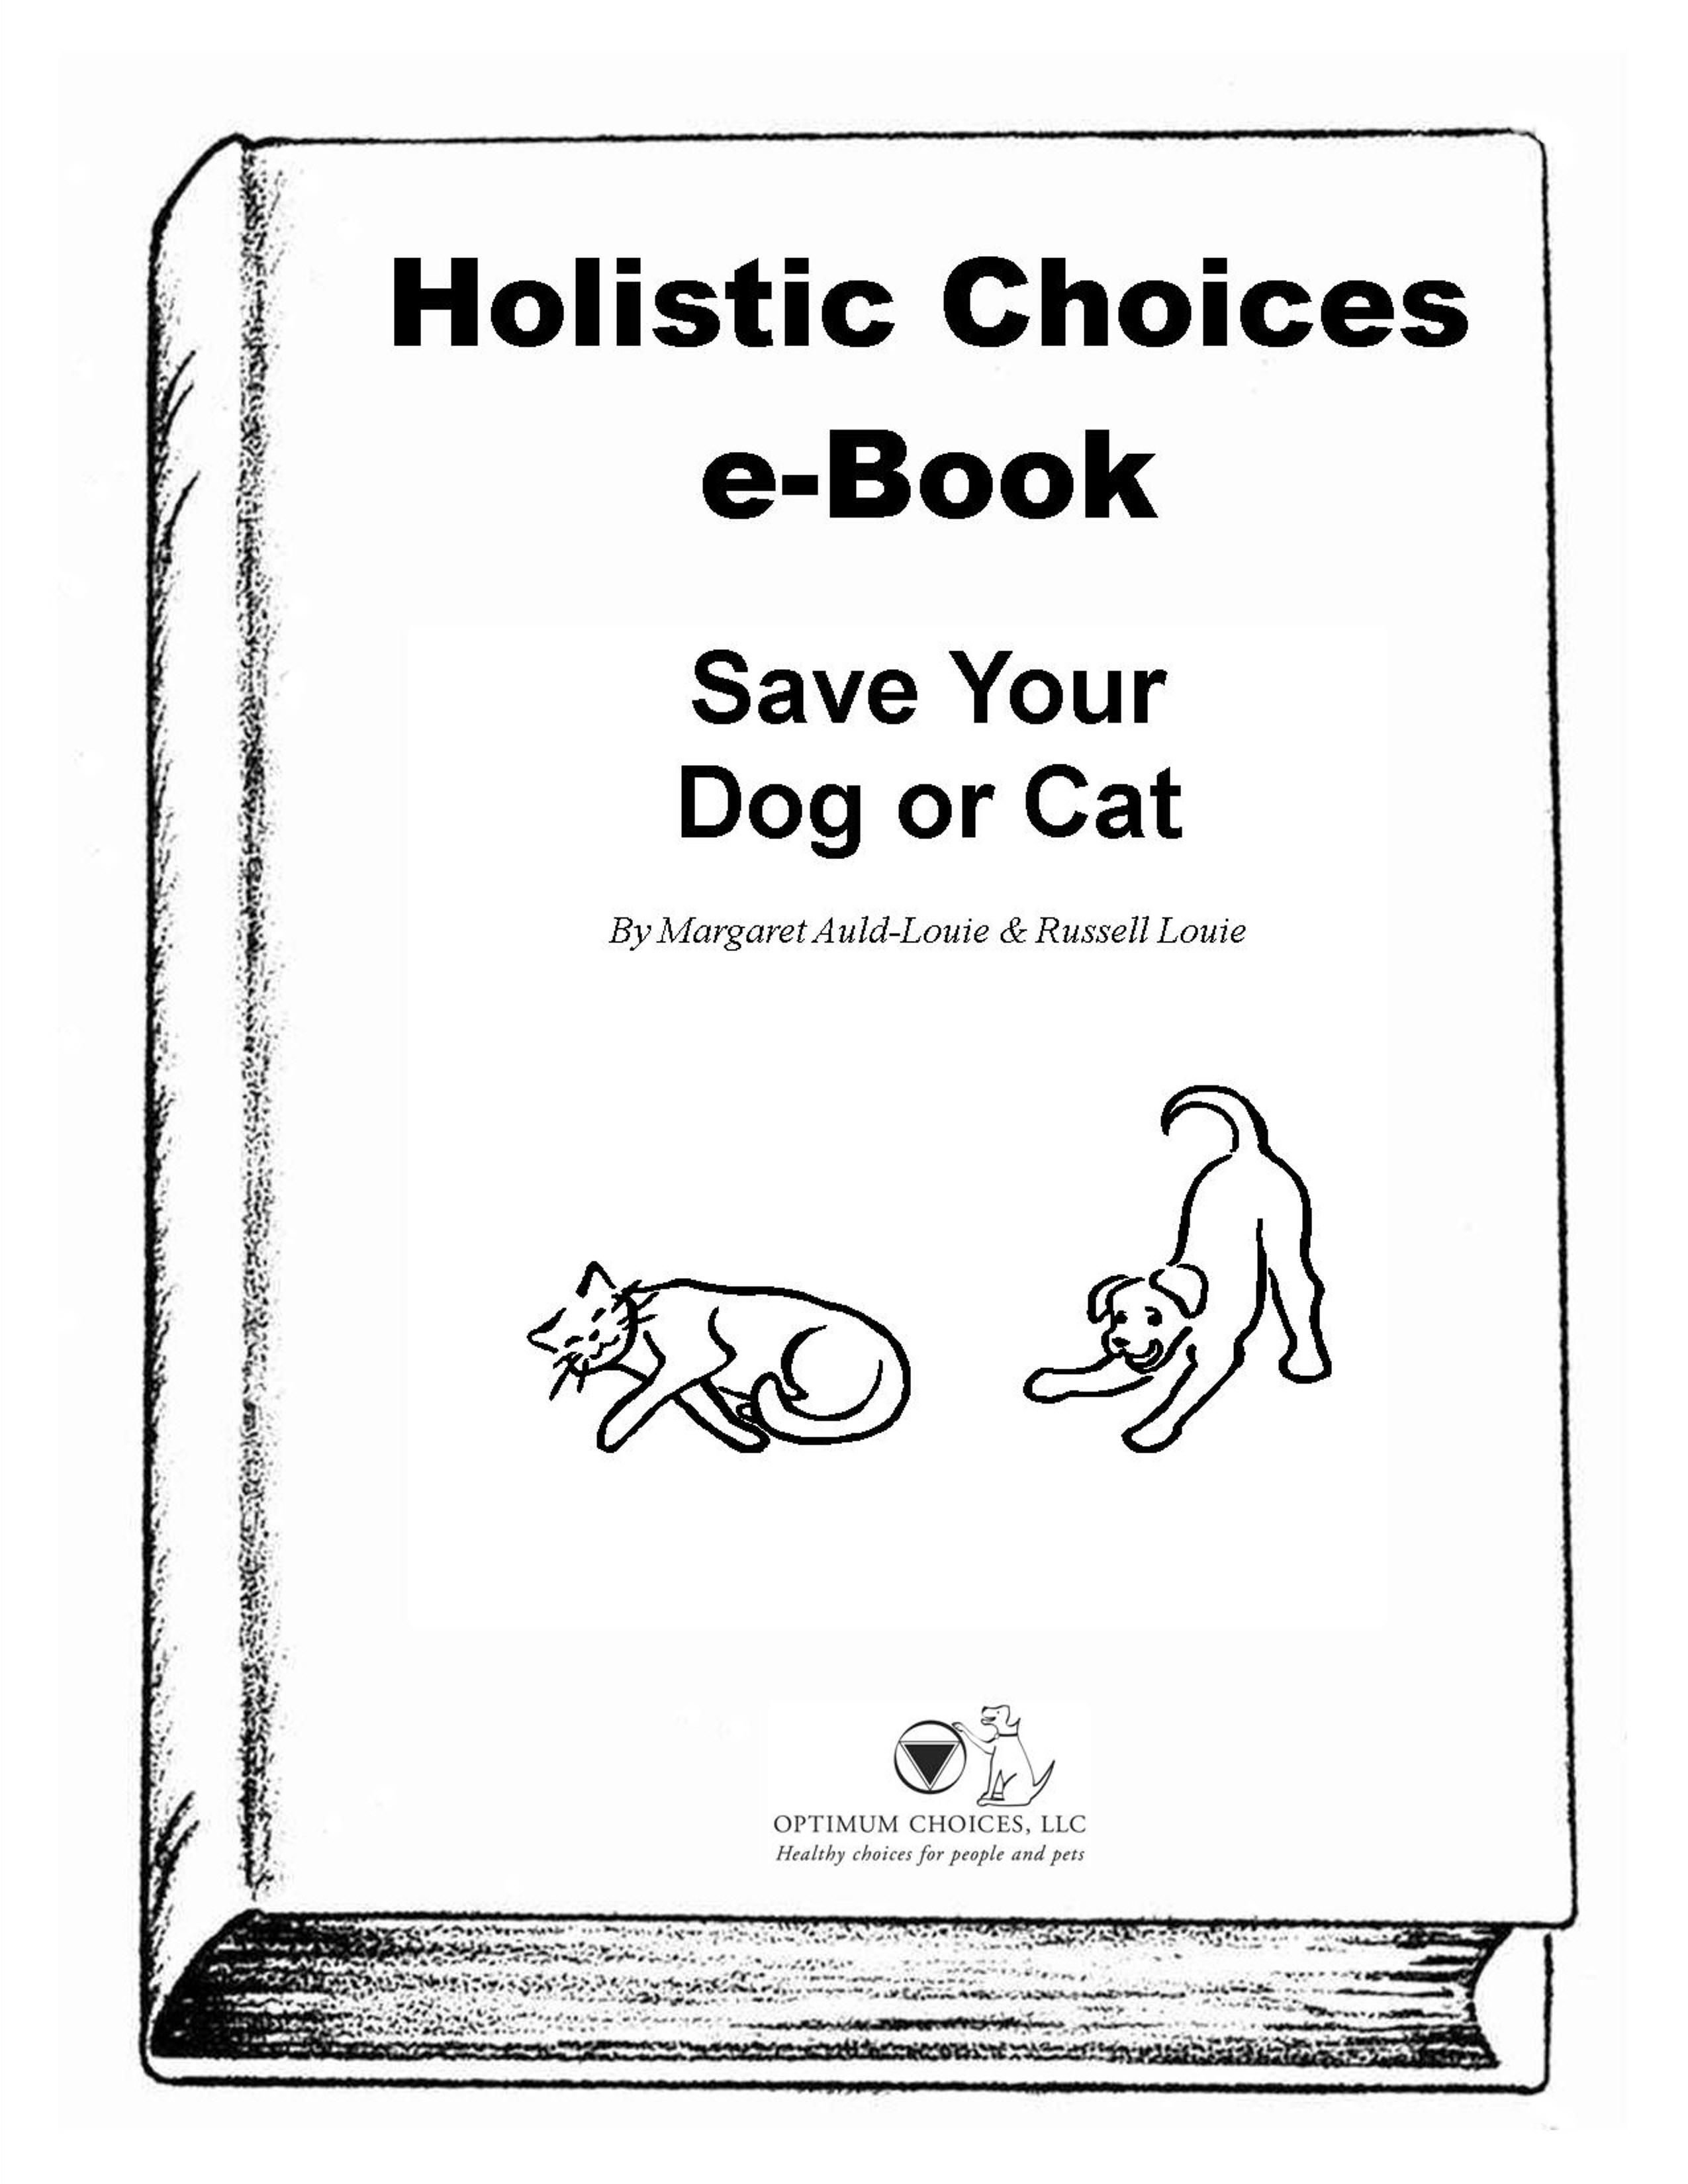 e-Book Save your dog or cat